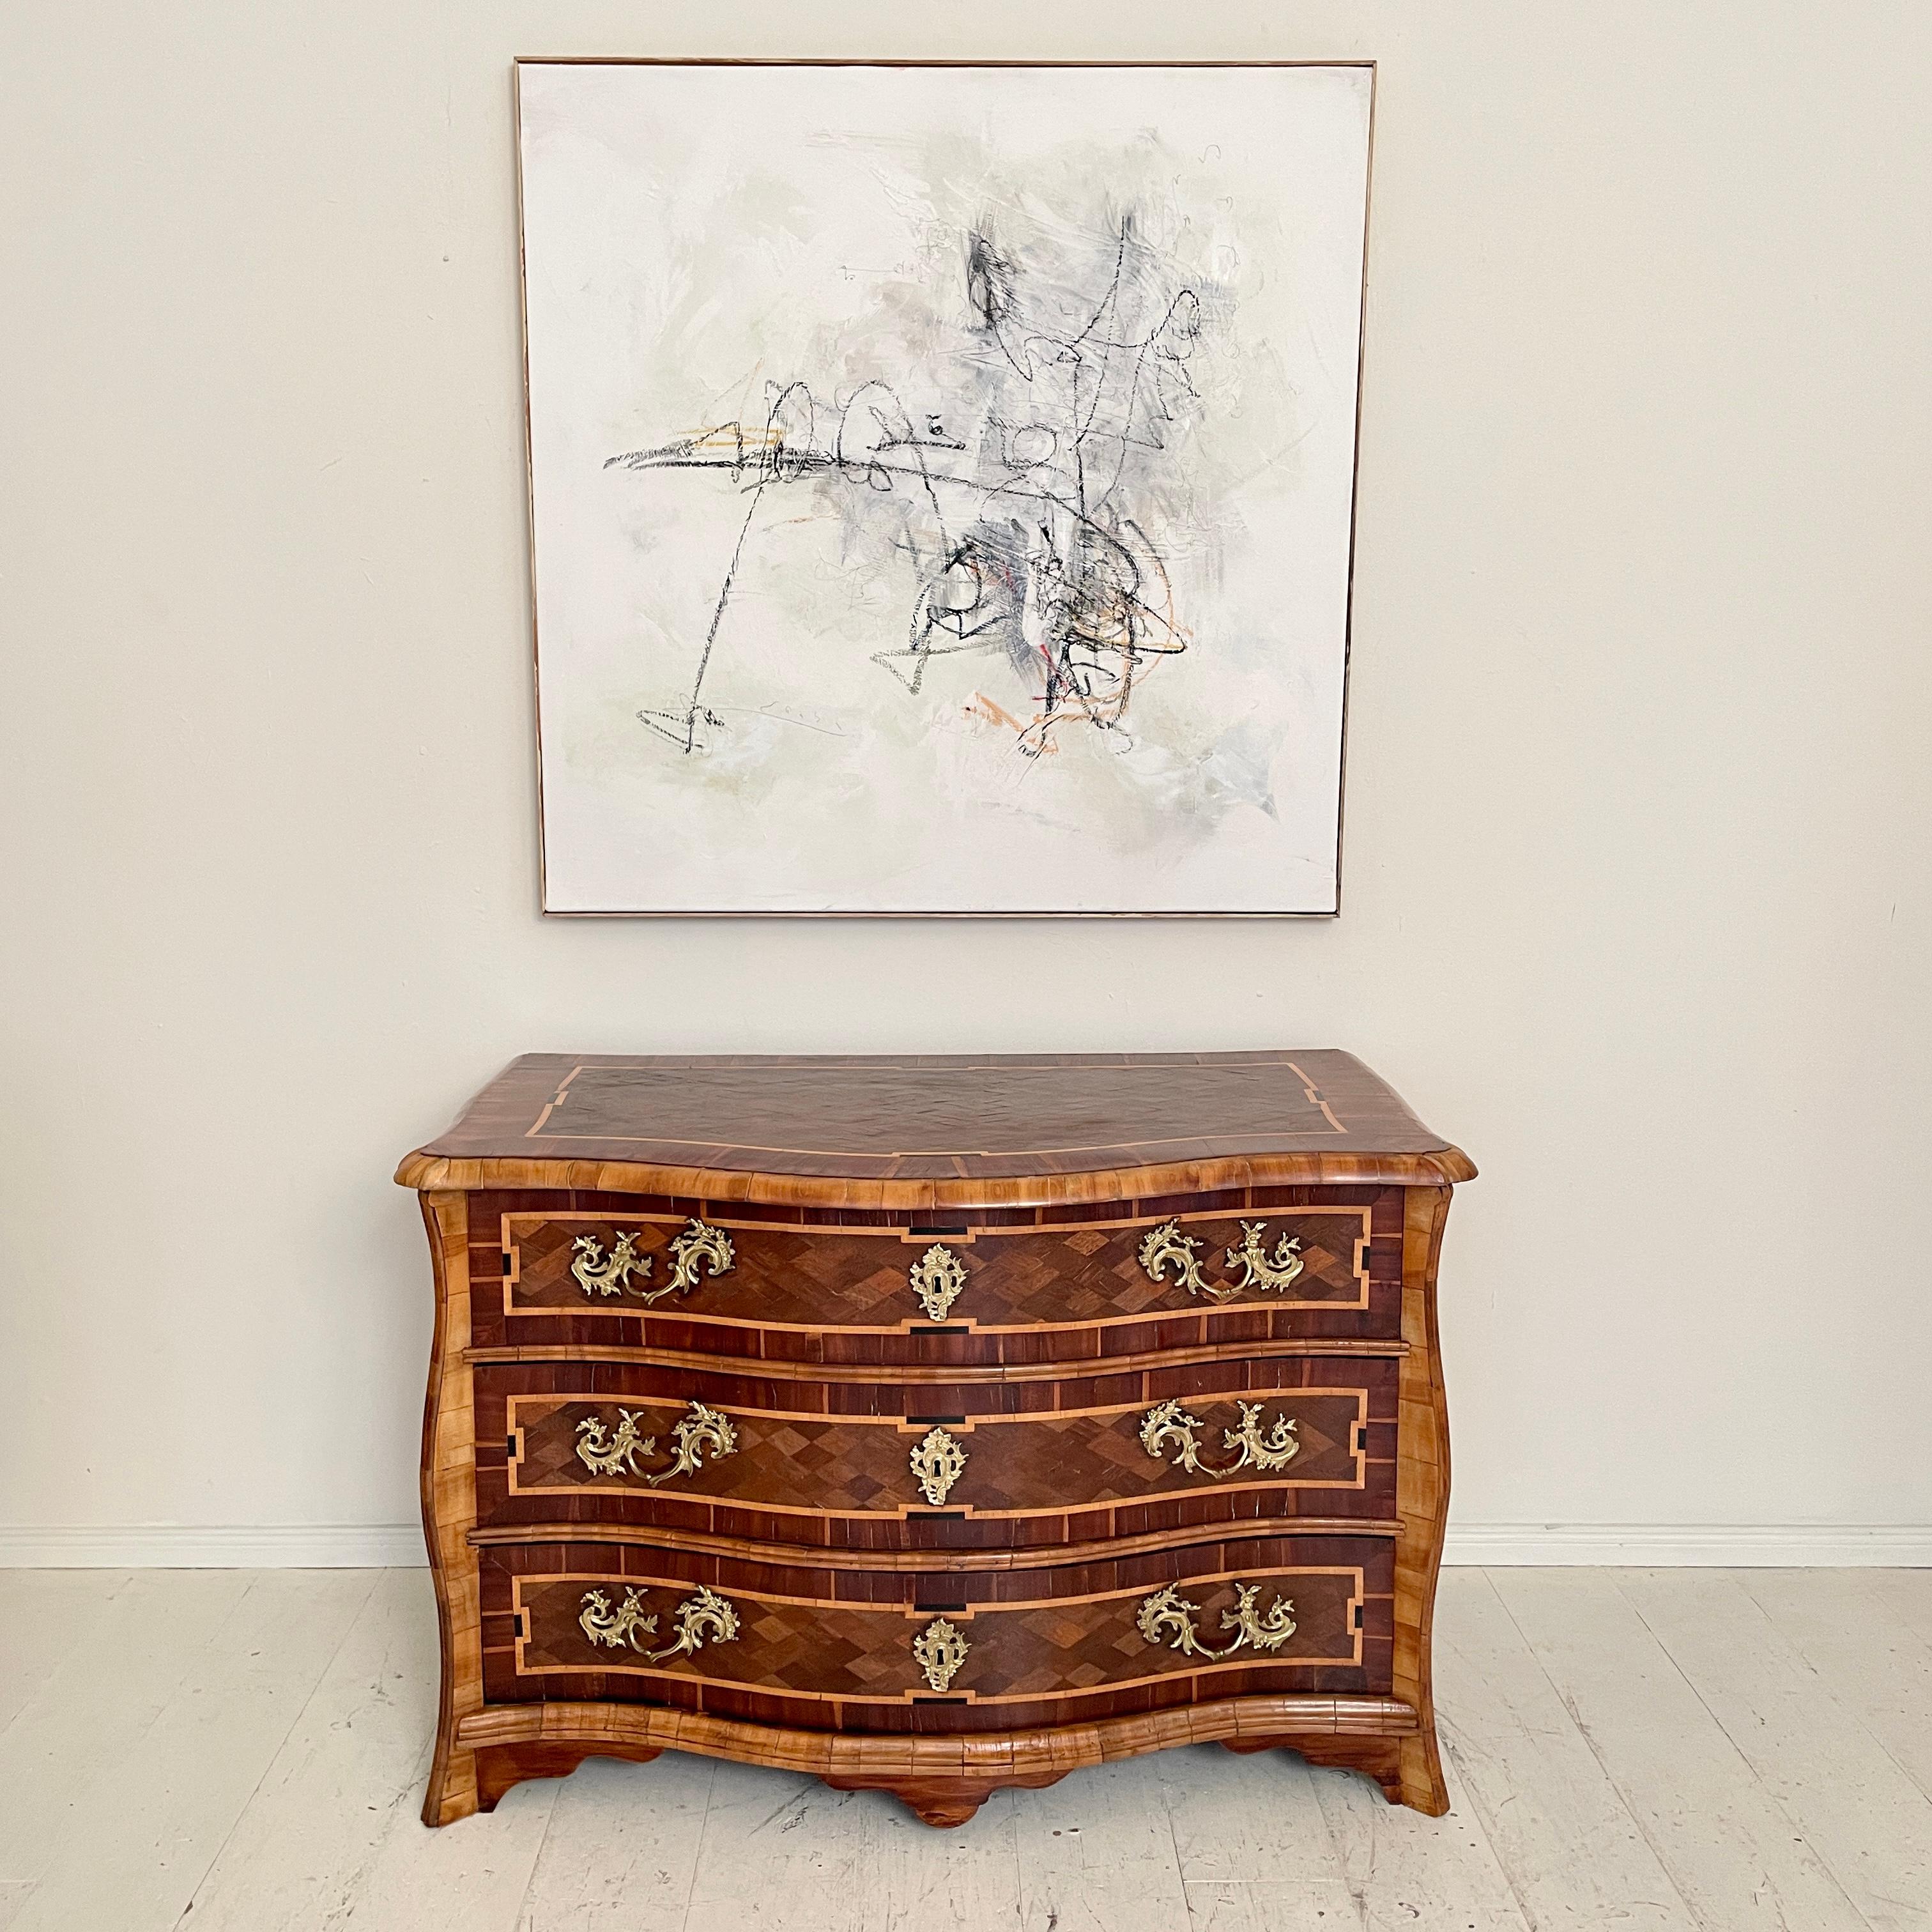 This beautiful 18th Century Dresdner Baroque Commode was made around 1760.
The pine corpus is veneered in Veilchen wood, amaranth and walnut. The bronze fittings are replaced but they are from a fantastic quality and are how the original would have